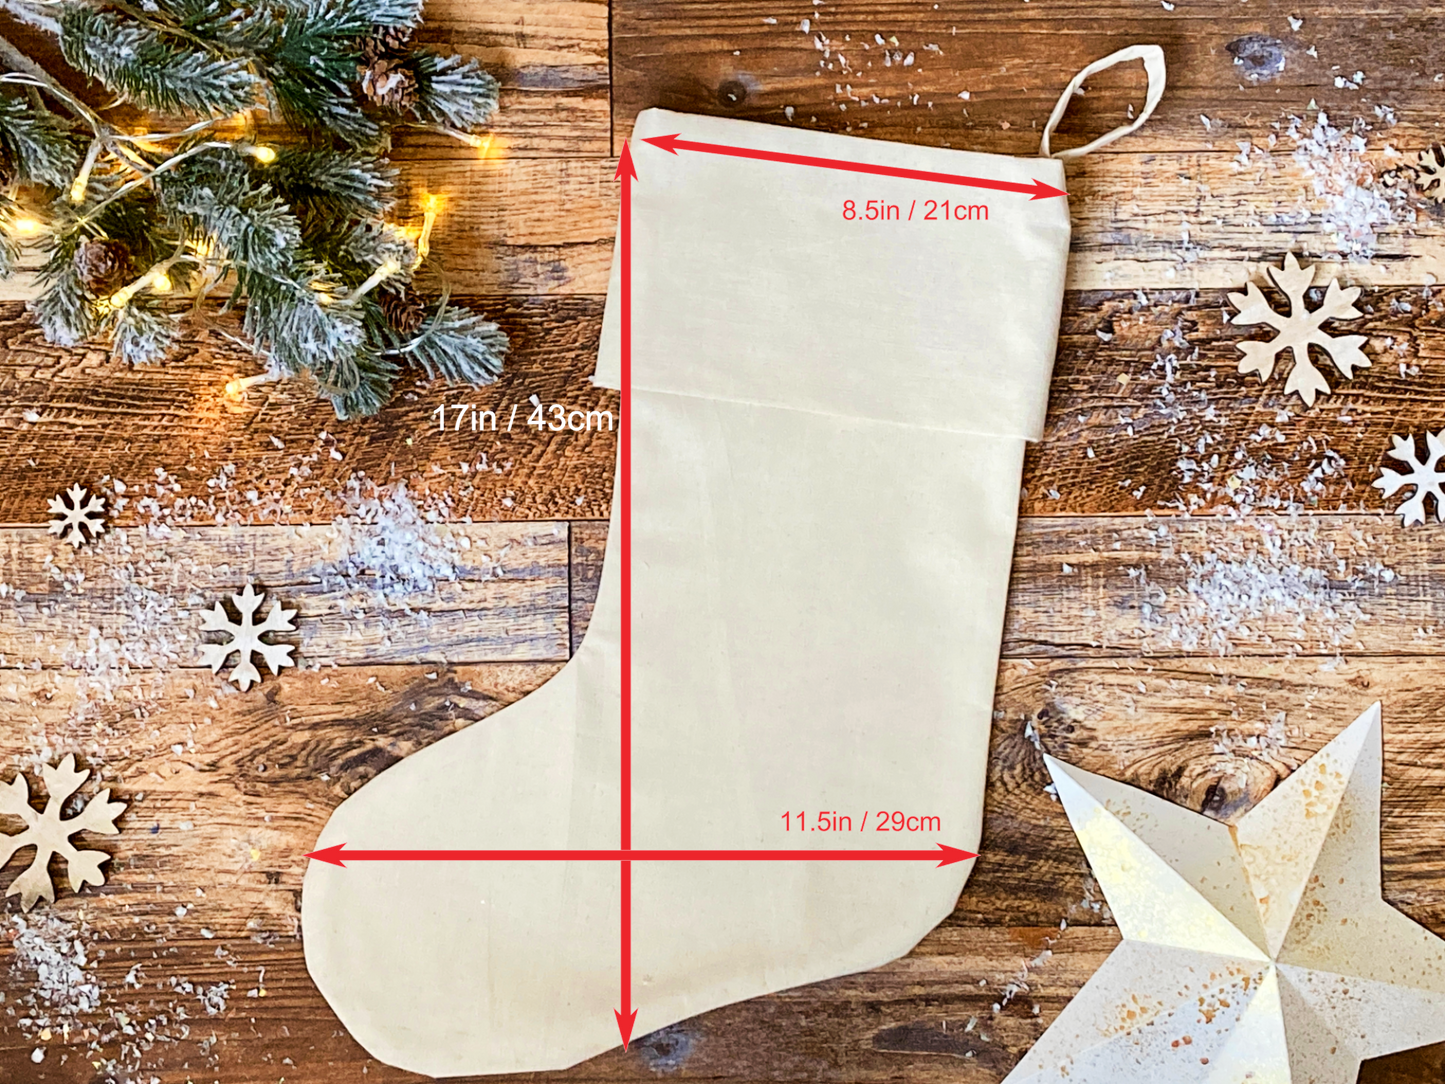 a photo to show the dimentions of a plain calico christmas stocking